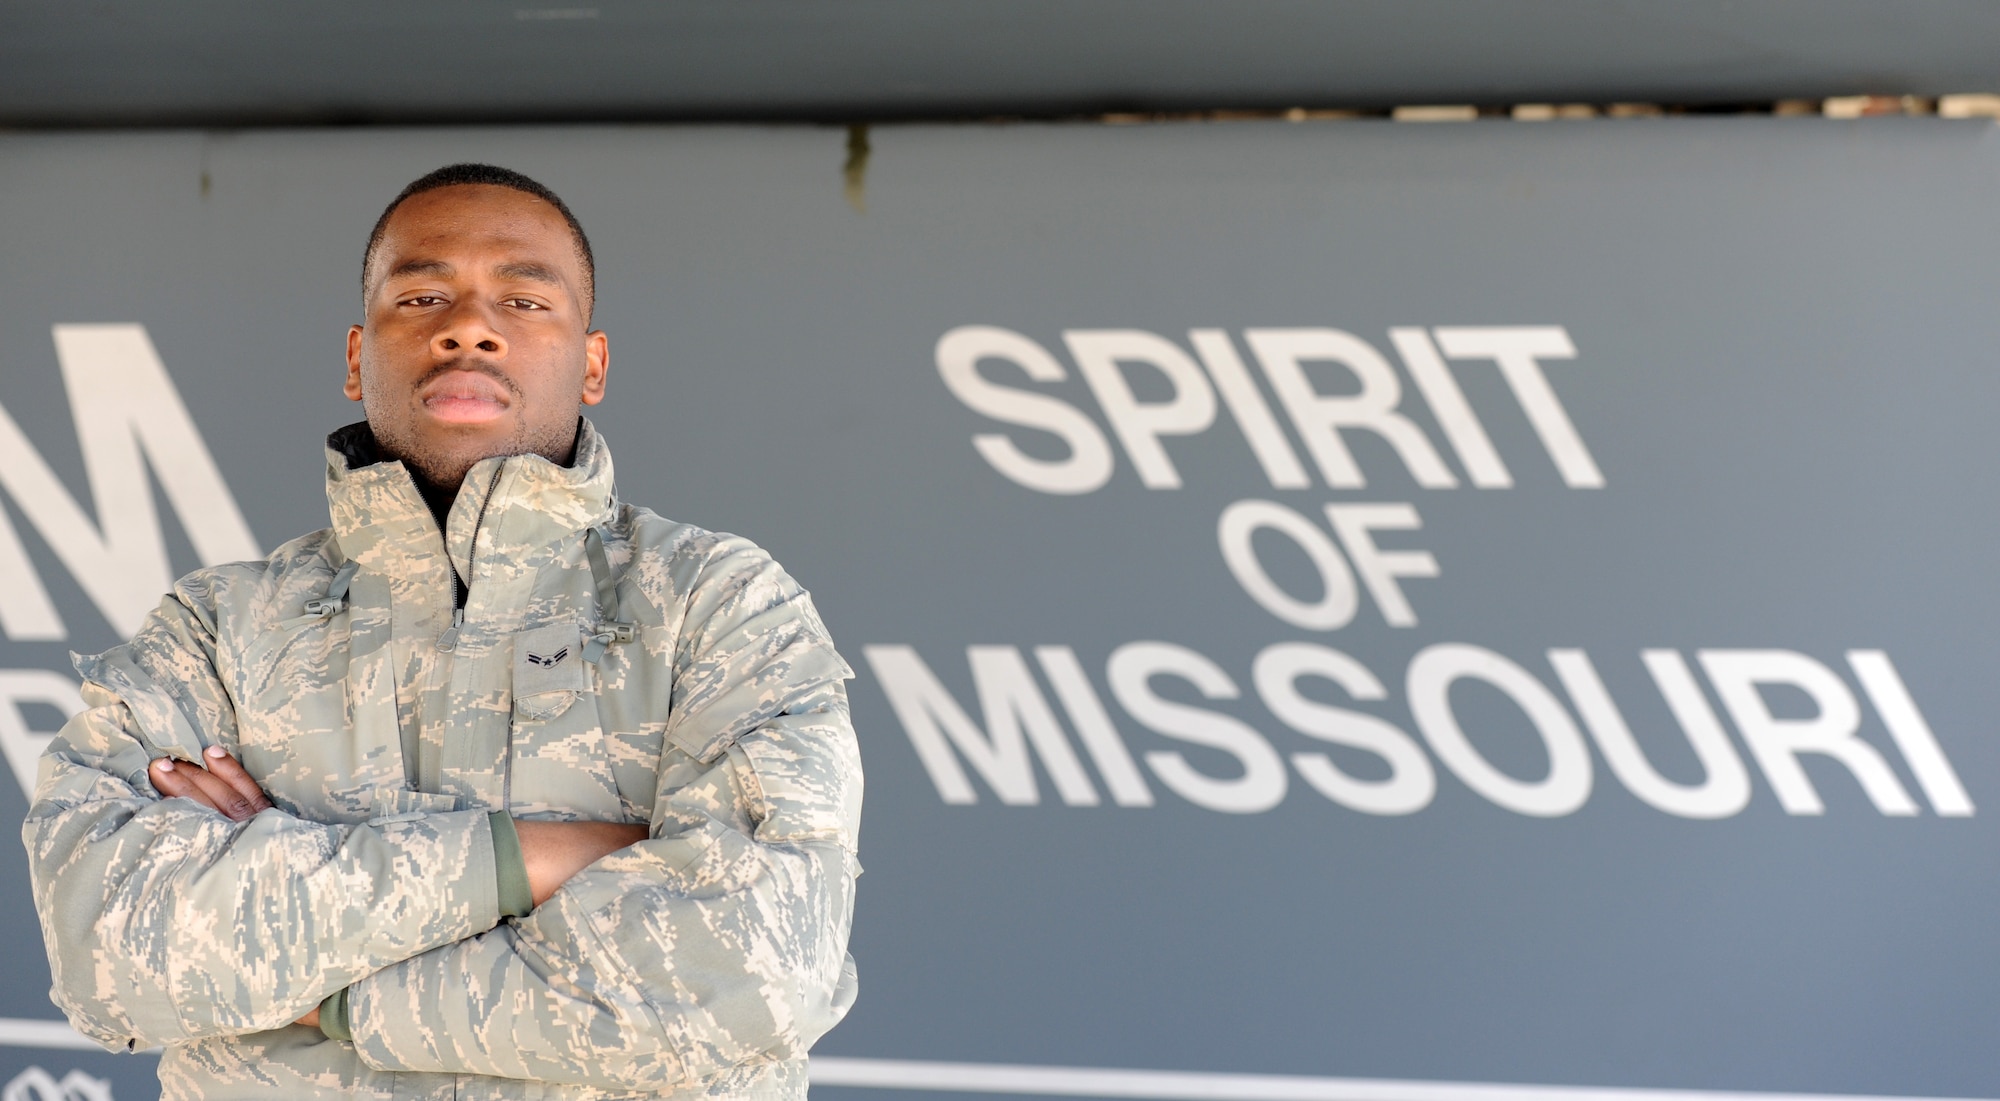 Airman 1st Class Steven McCray, 13th Aircraft Maintenance Unit B-2 crew chief, is one of more than 160 crew chiefs who perform maintenance on the B-2. He is assigned to the team that provides maintenance to the “Spirit of Missouri,” which is one of two B-2s recently flown on a long-duration, round-trip training mission to South Korea March 28, 2013 as part of the Foal Eagle training exercise. (U.S. Air Force photo by Staff Sgt. Nick Wilson/Released) 
